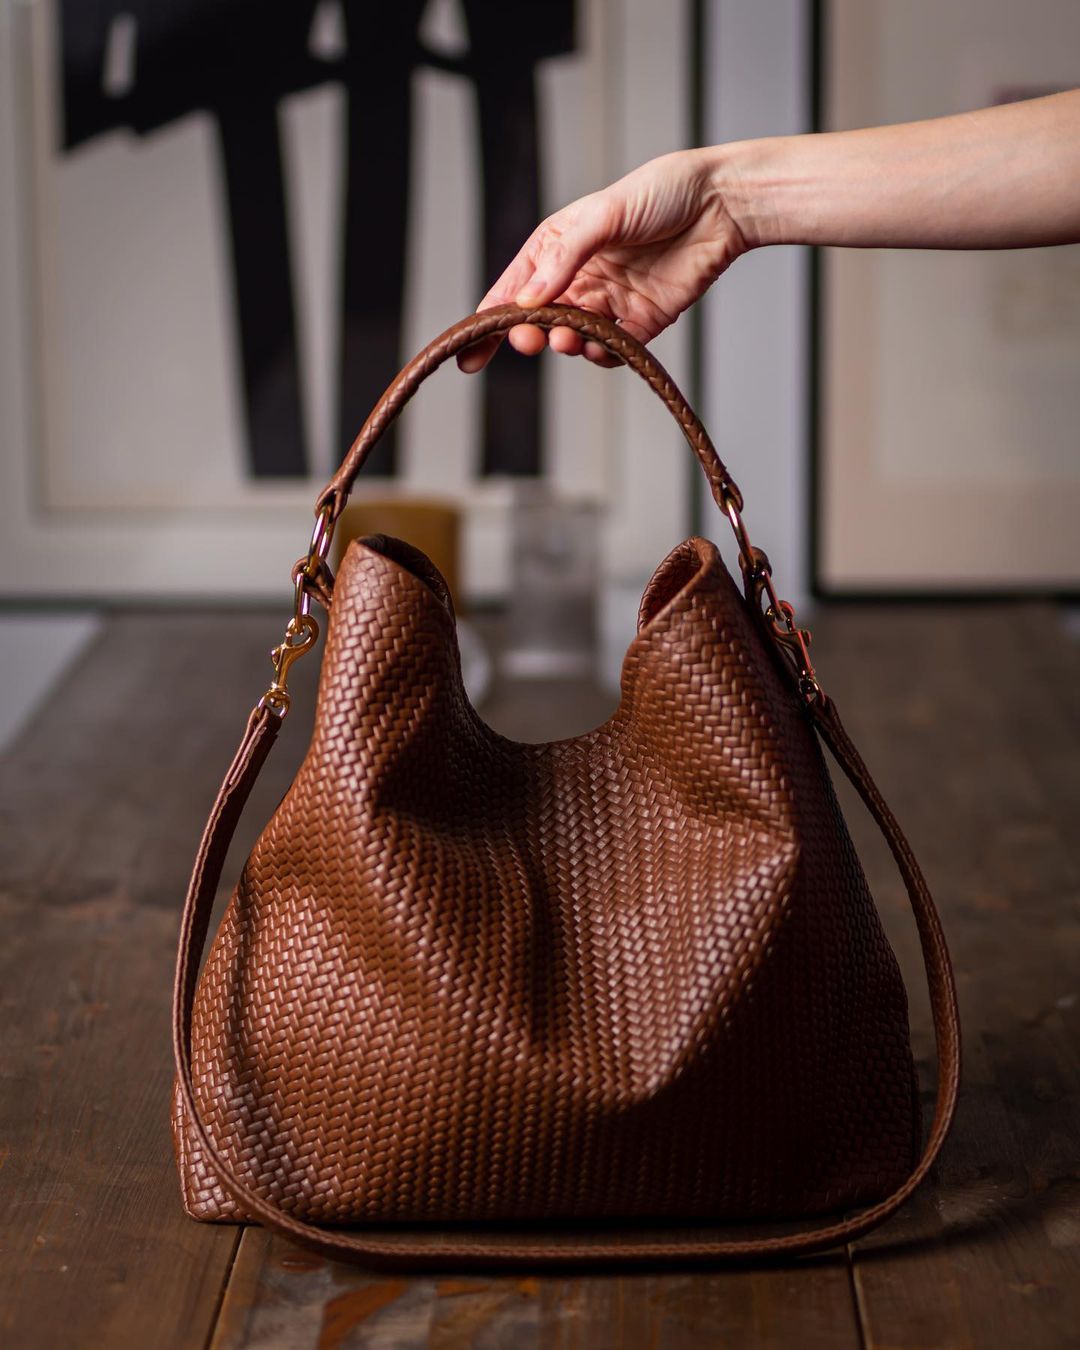 Luxurious Leather Bags for High-End Style